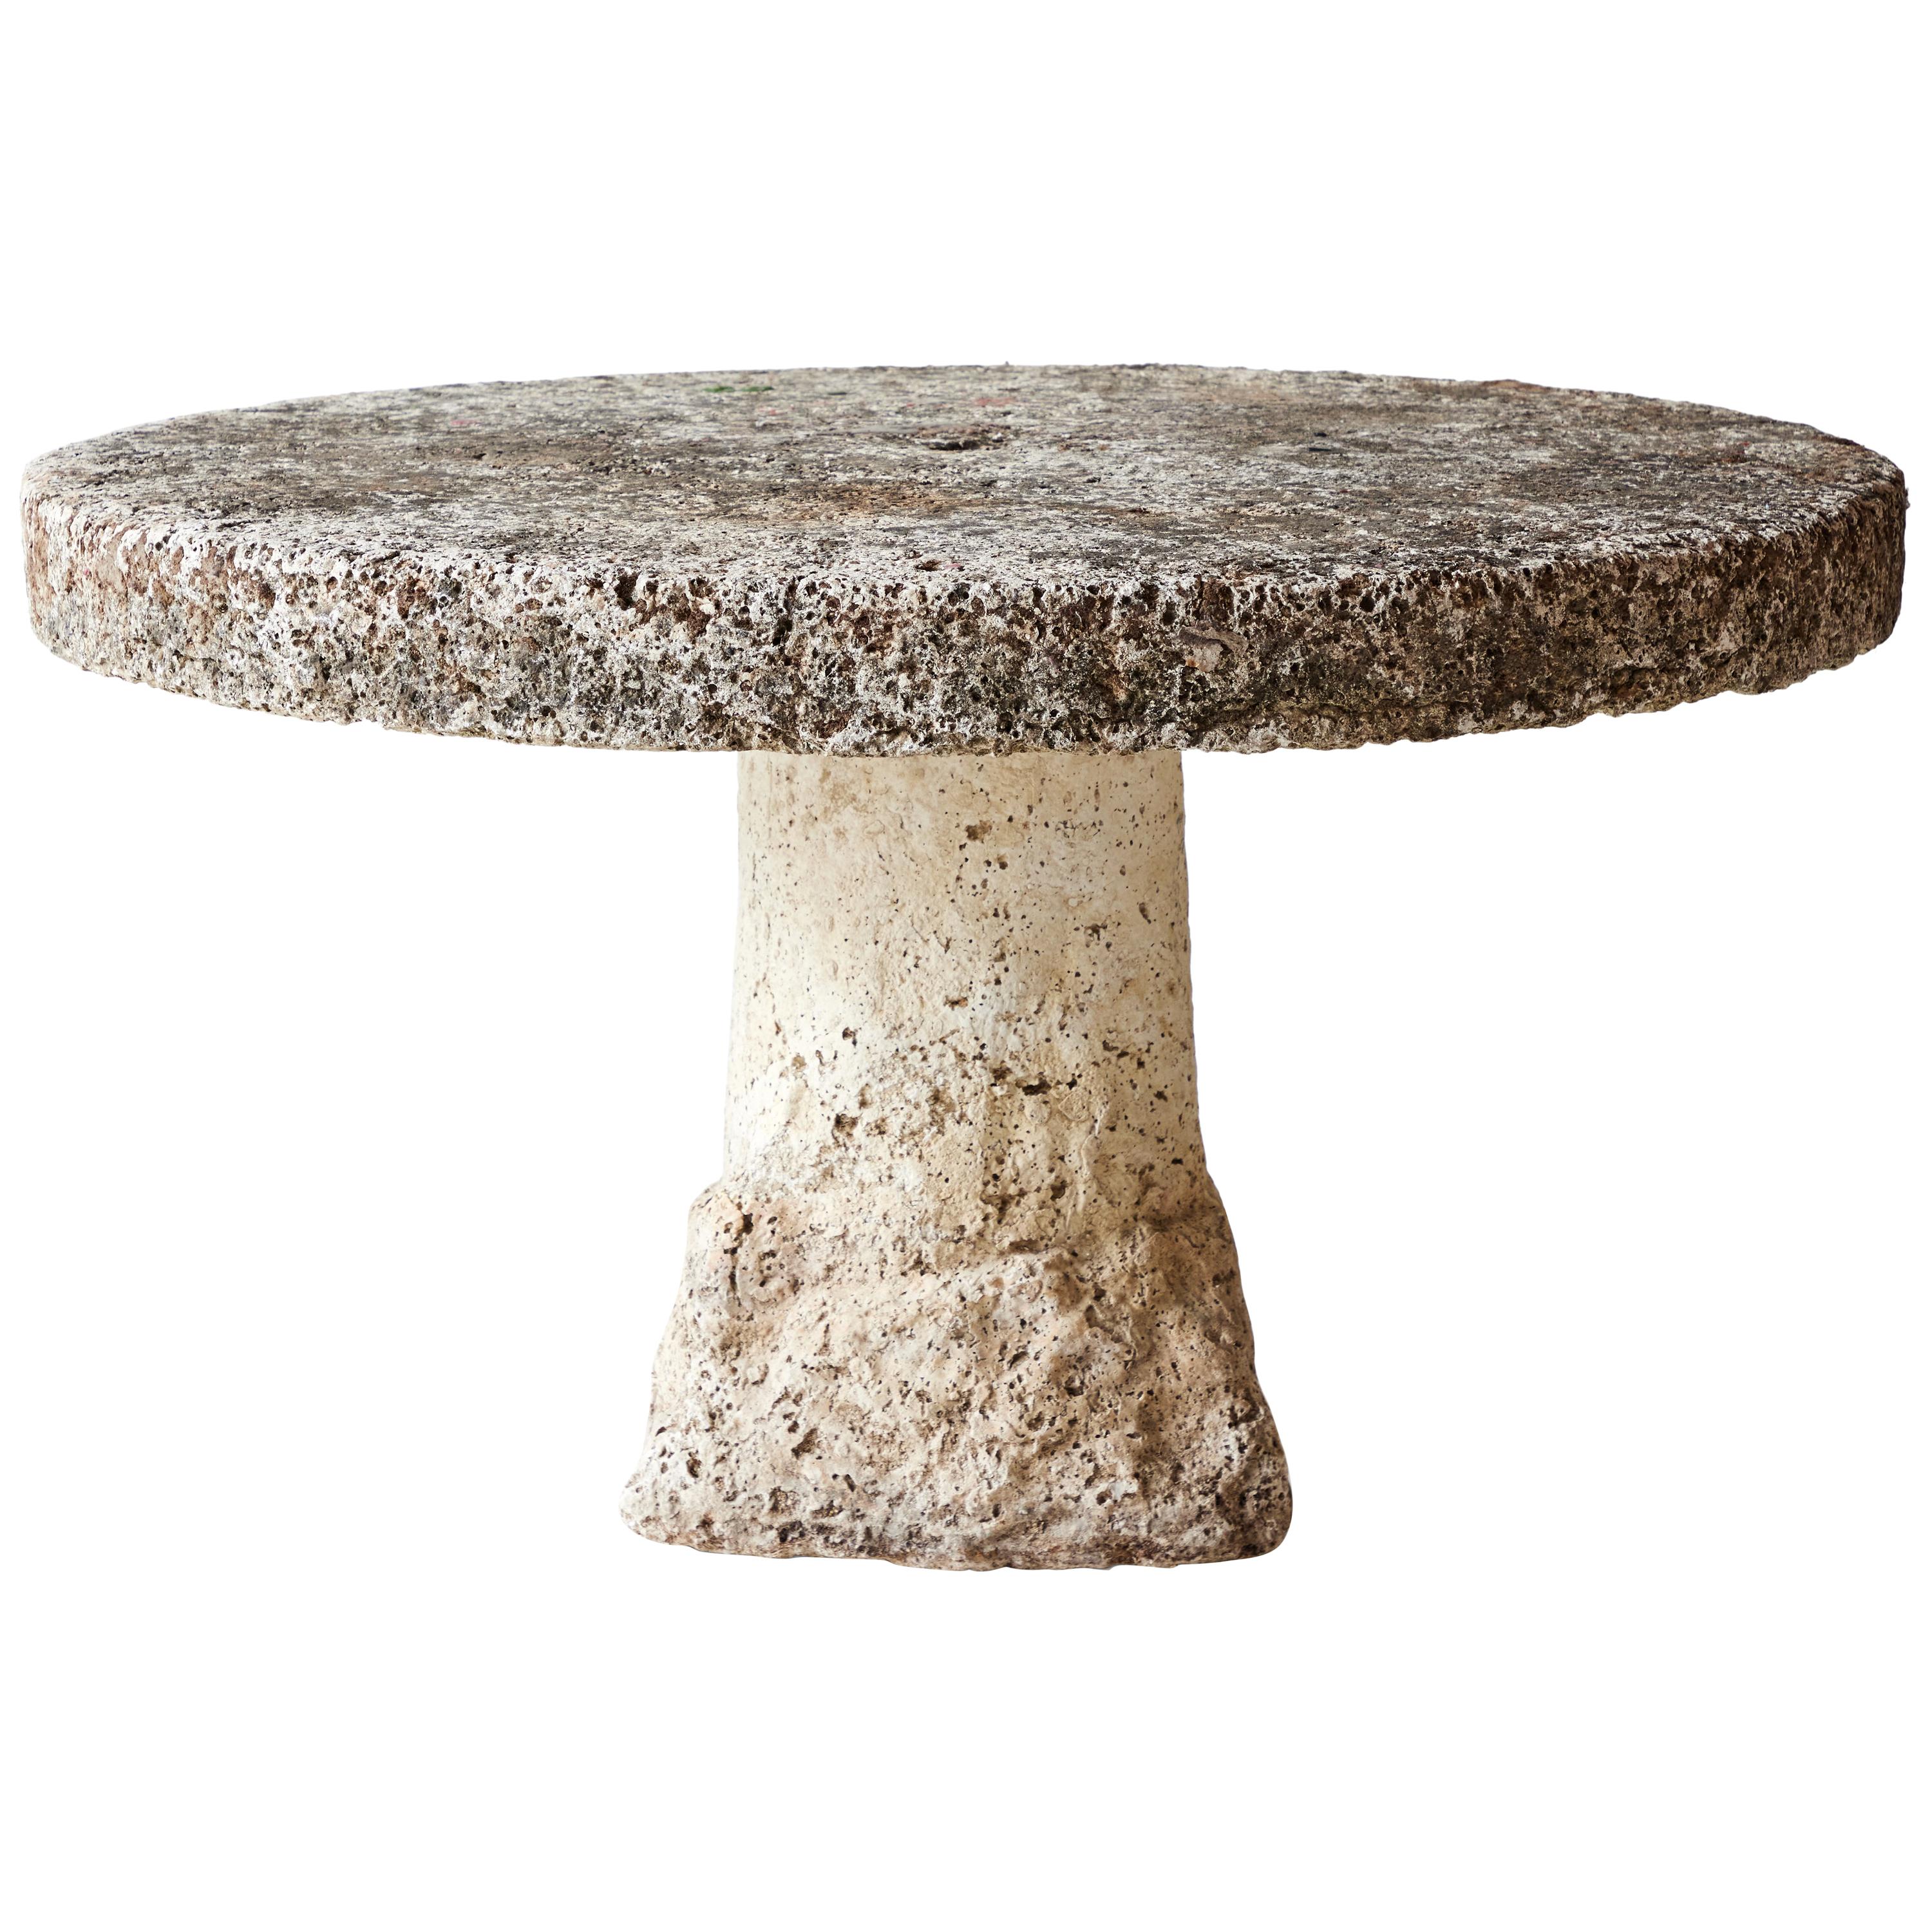 Early 20th Century Cast Stone Round Garden Table